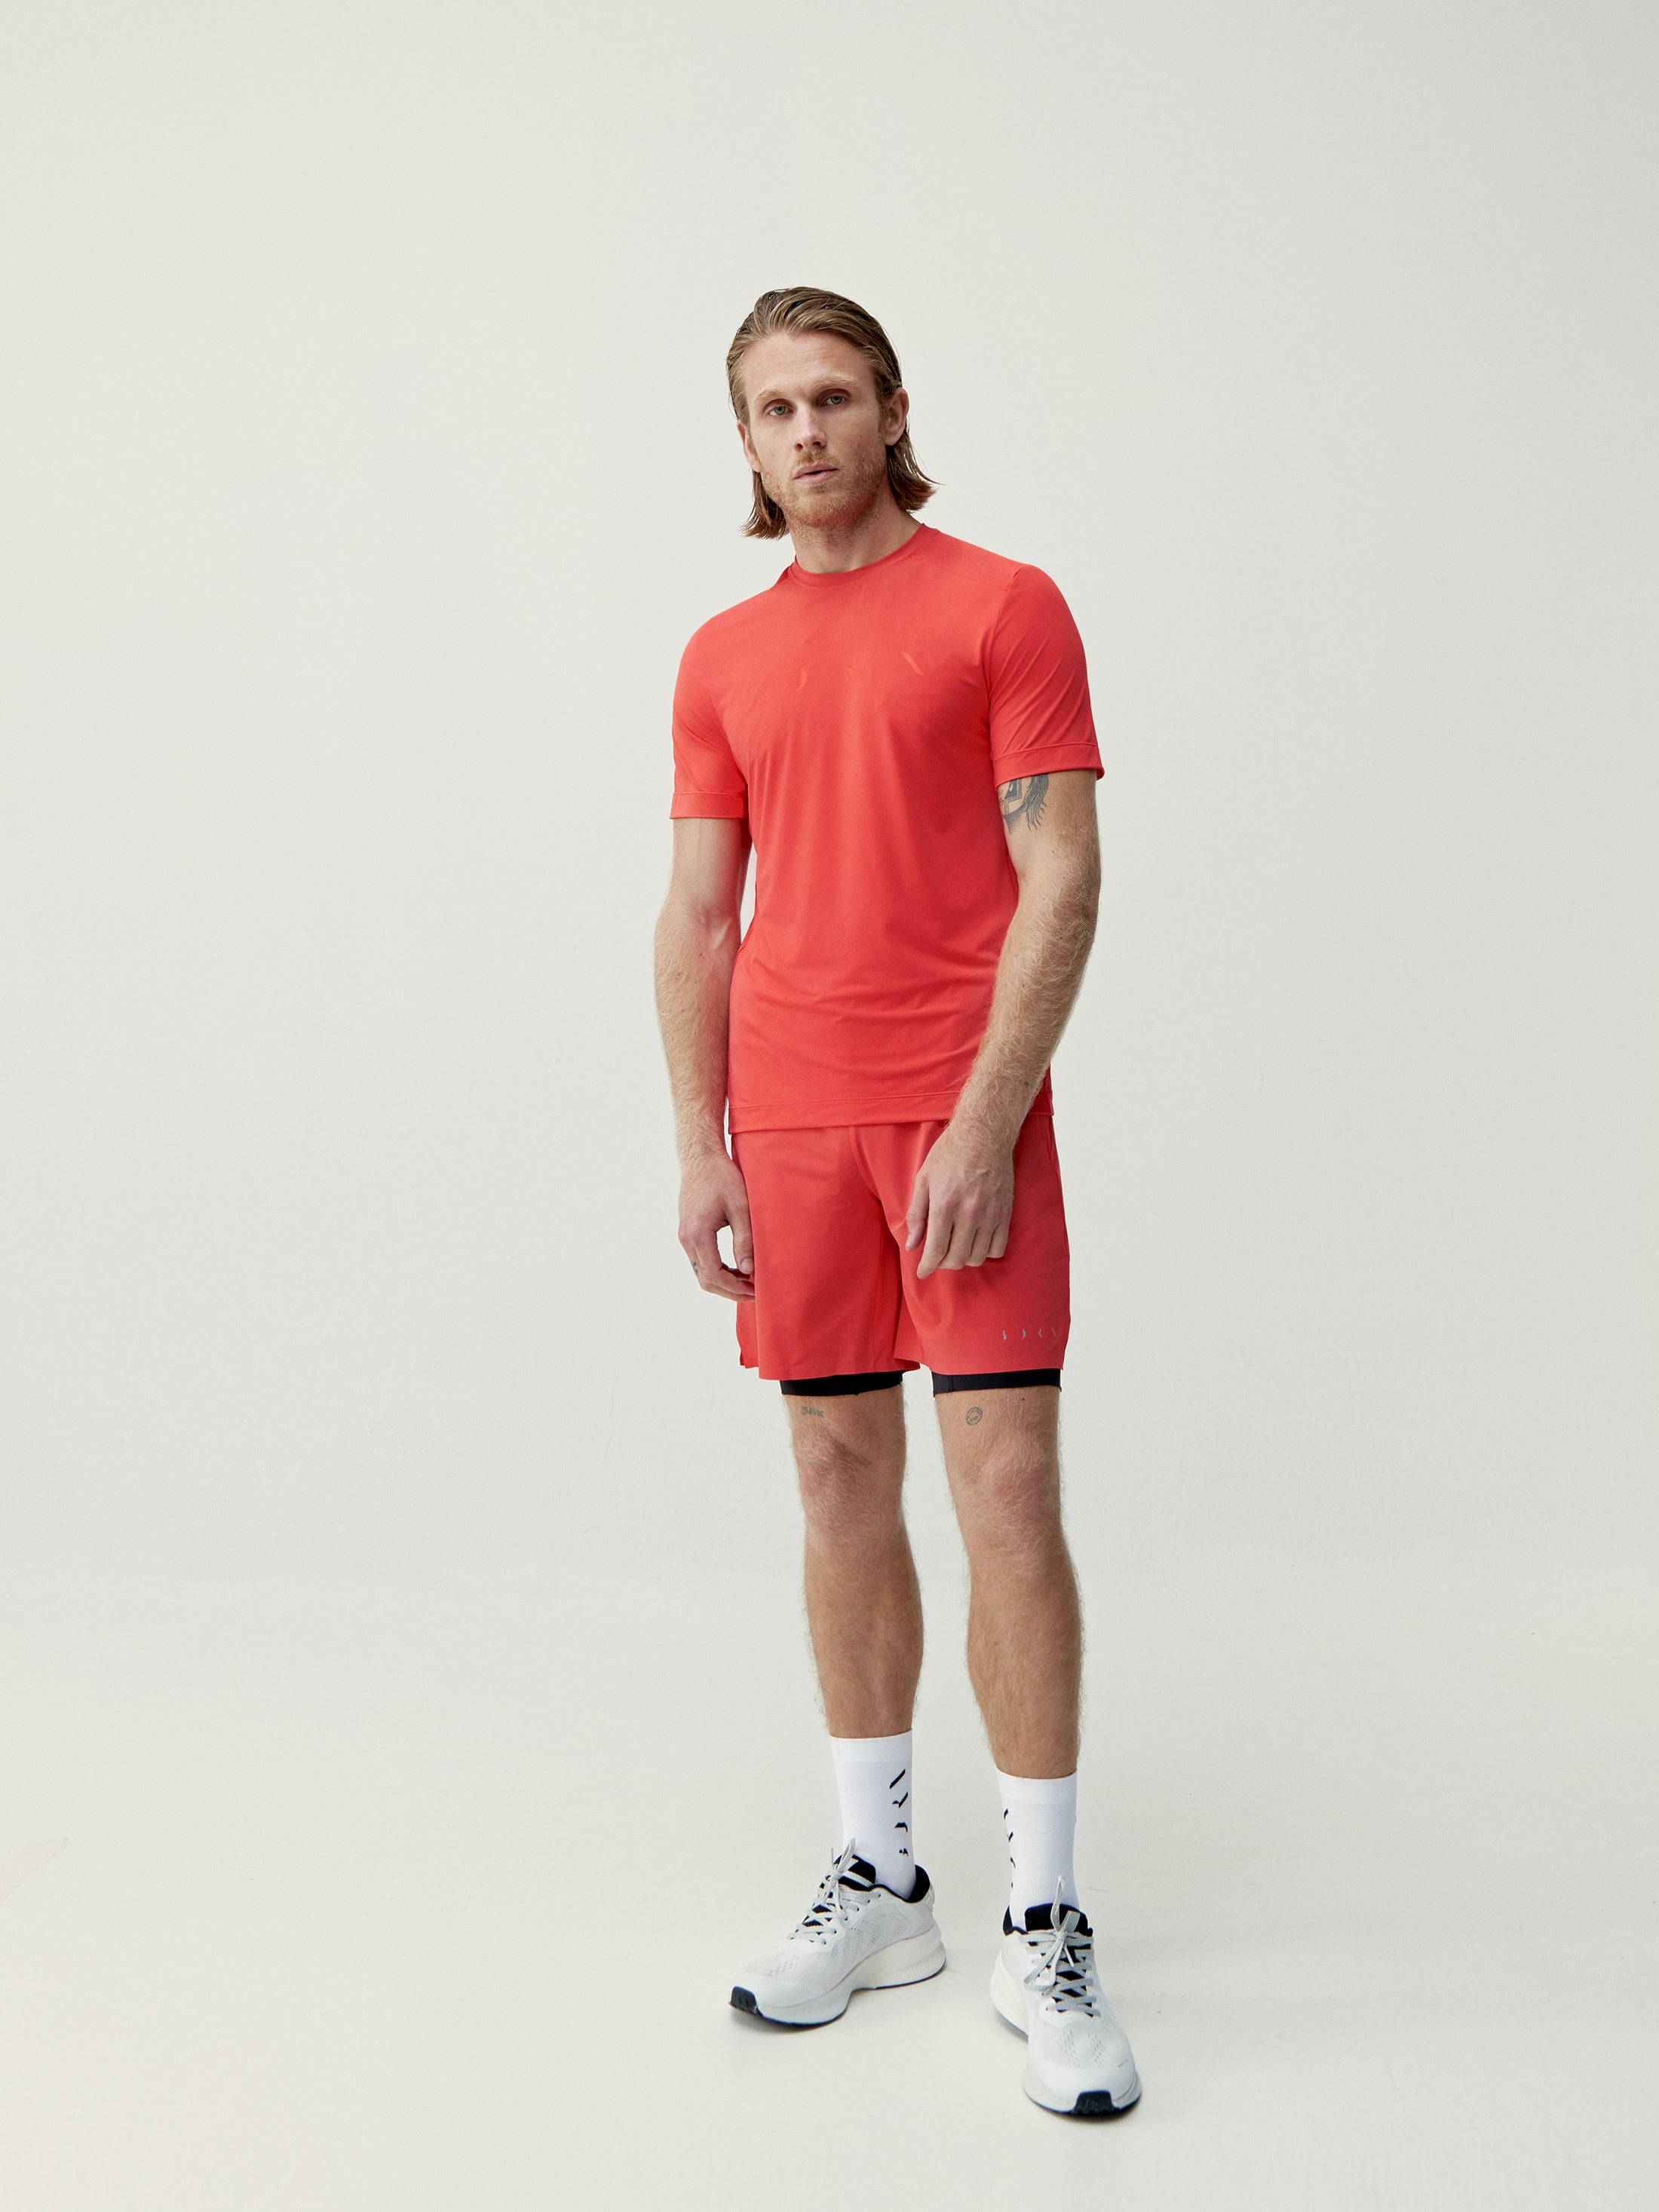 Volta T-Shirt in Coral Bright